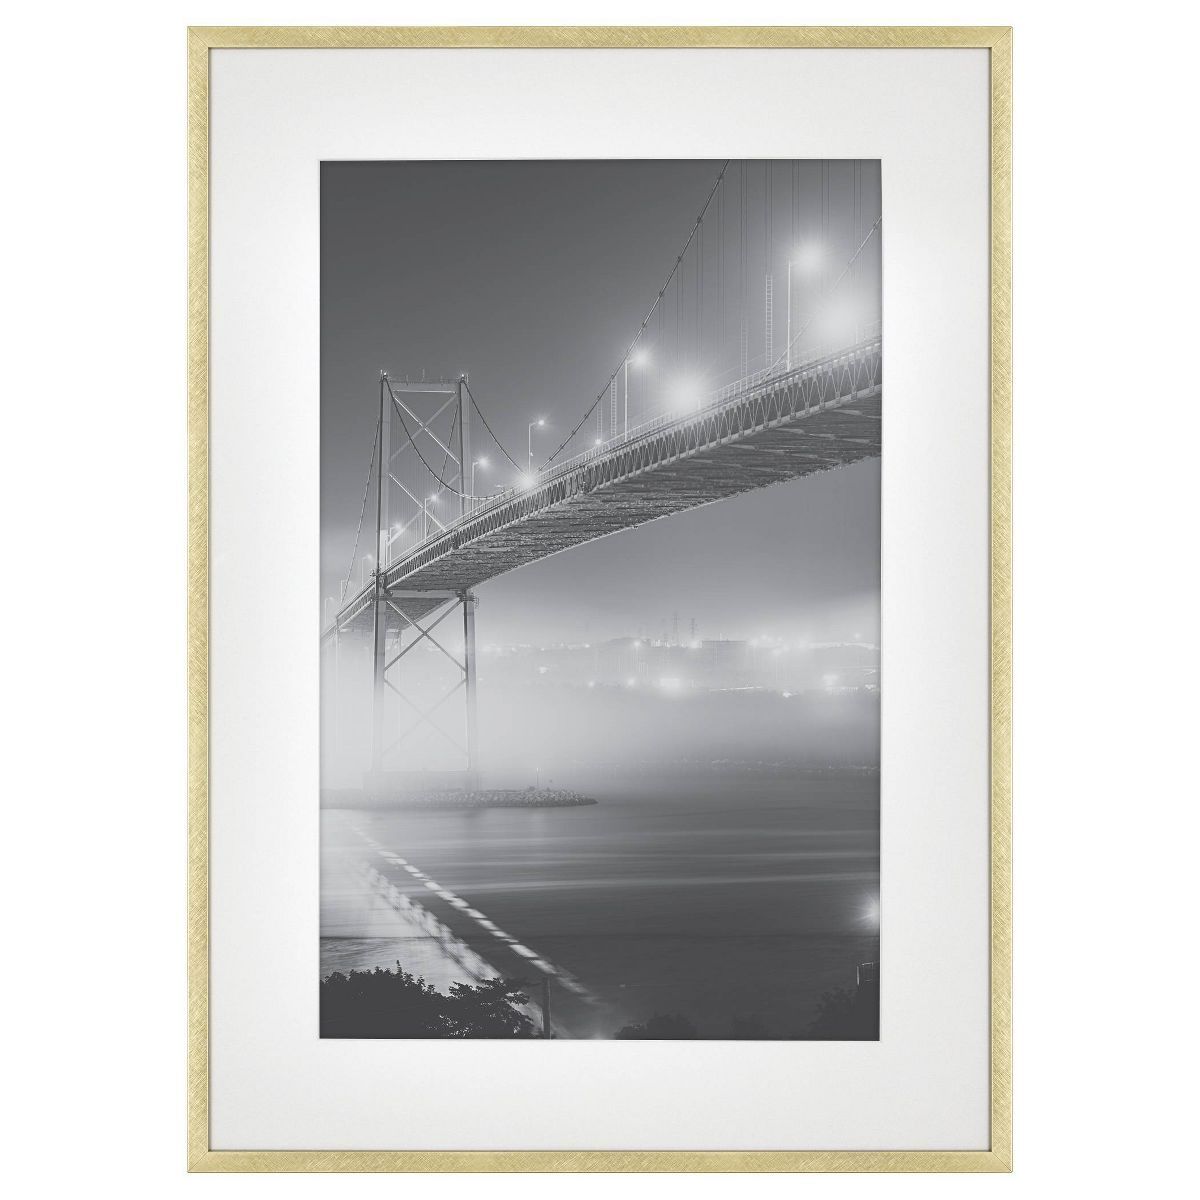 15.4" x 21.4" Matted to 11" x 17" Thin Metal Gallery Frame Brass - Threshold™ | Target